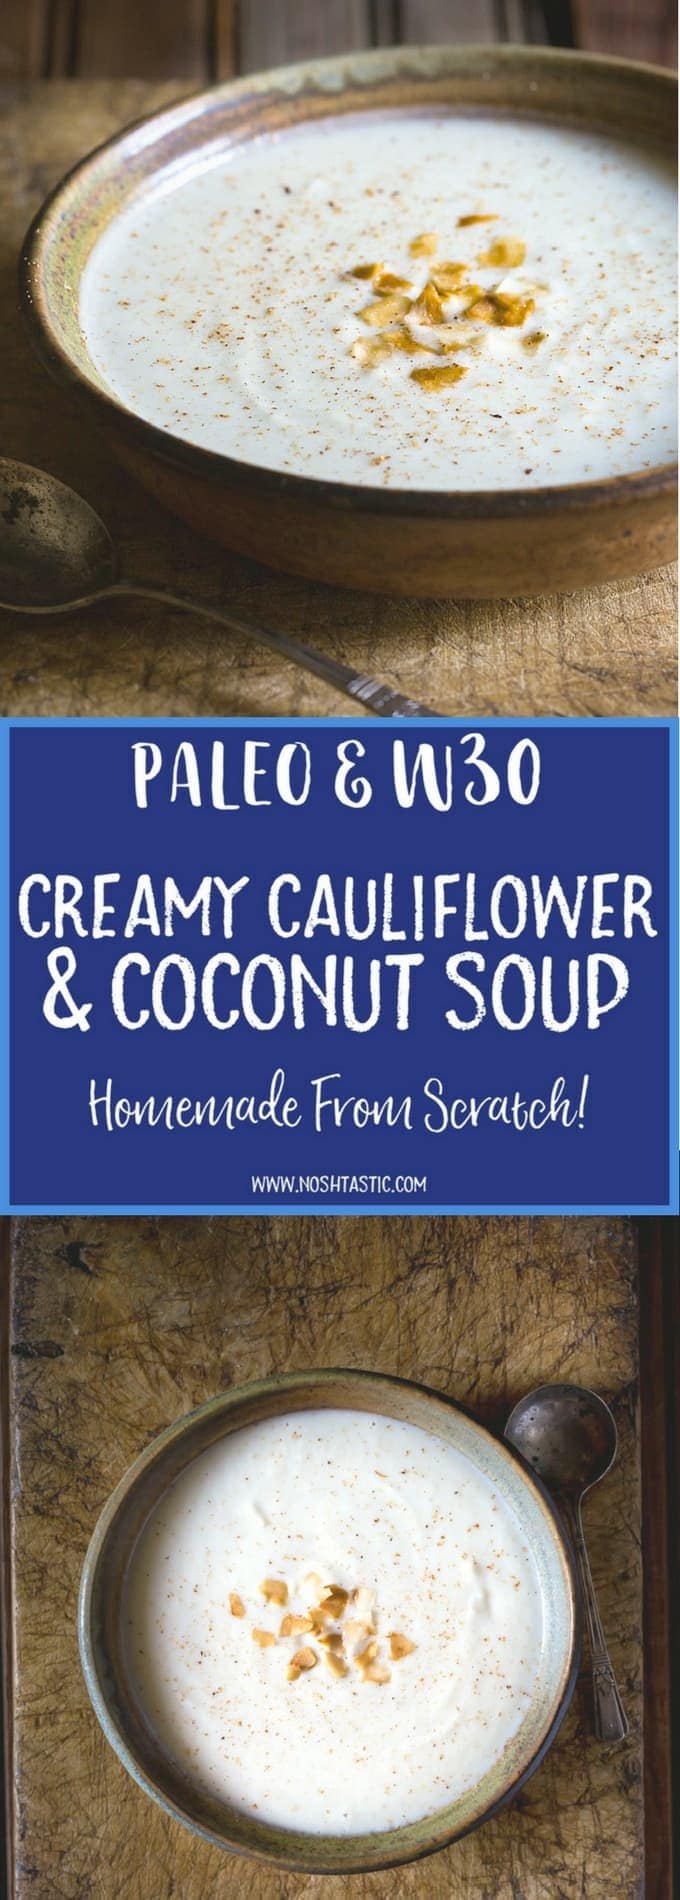 A Creamy, dairy free Paleo Cauliflower Soup with Coconut Milk with a hint of nutmeg! it’s Gluten Free with a Vegan option, and Whole30 too.